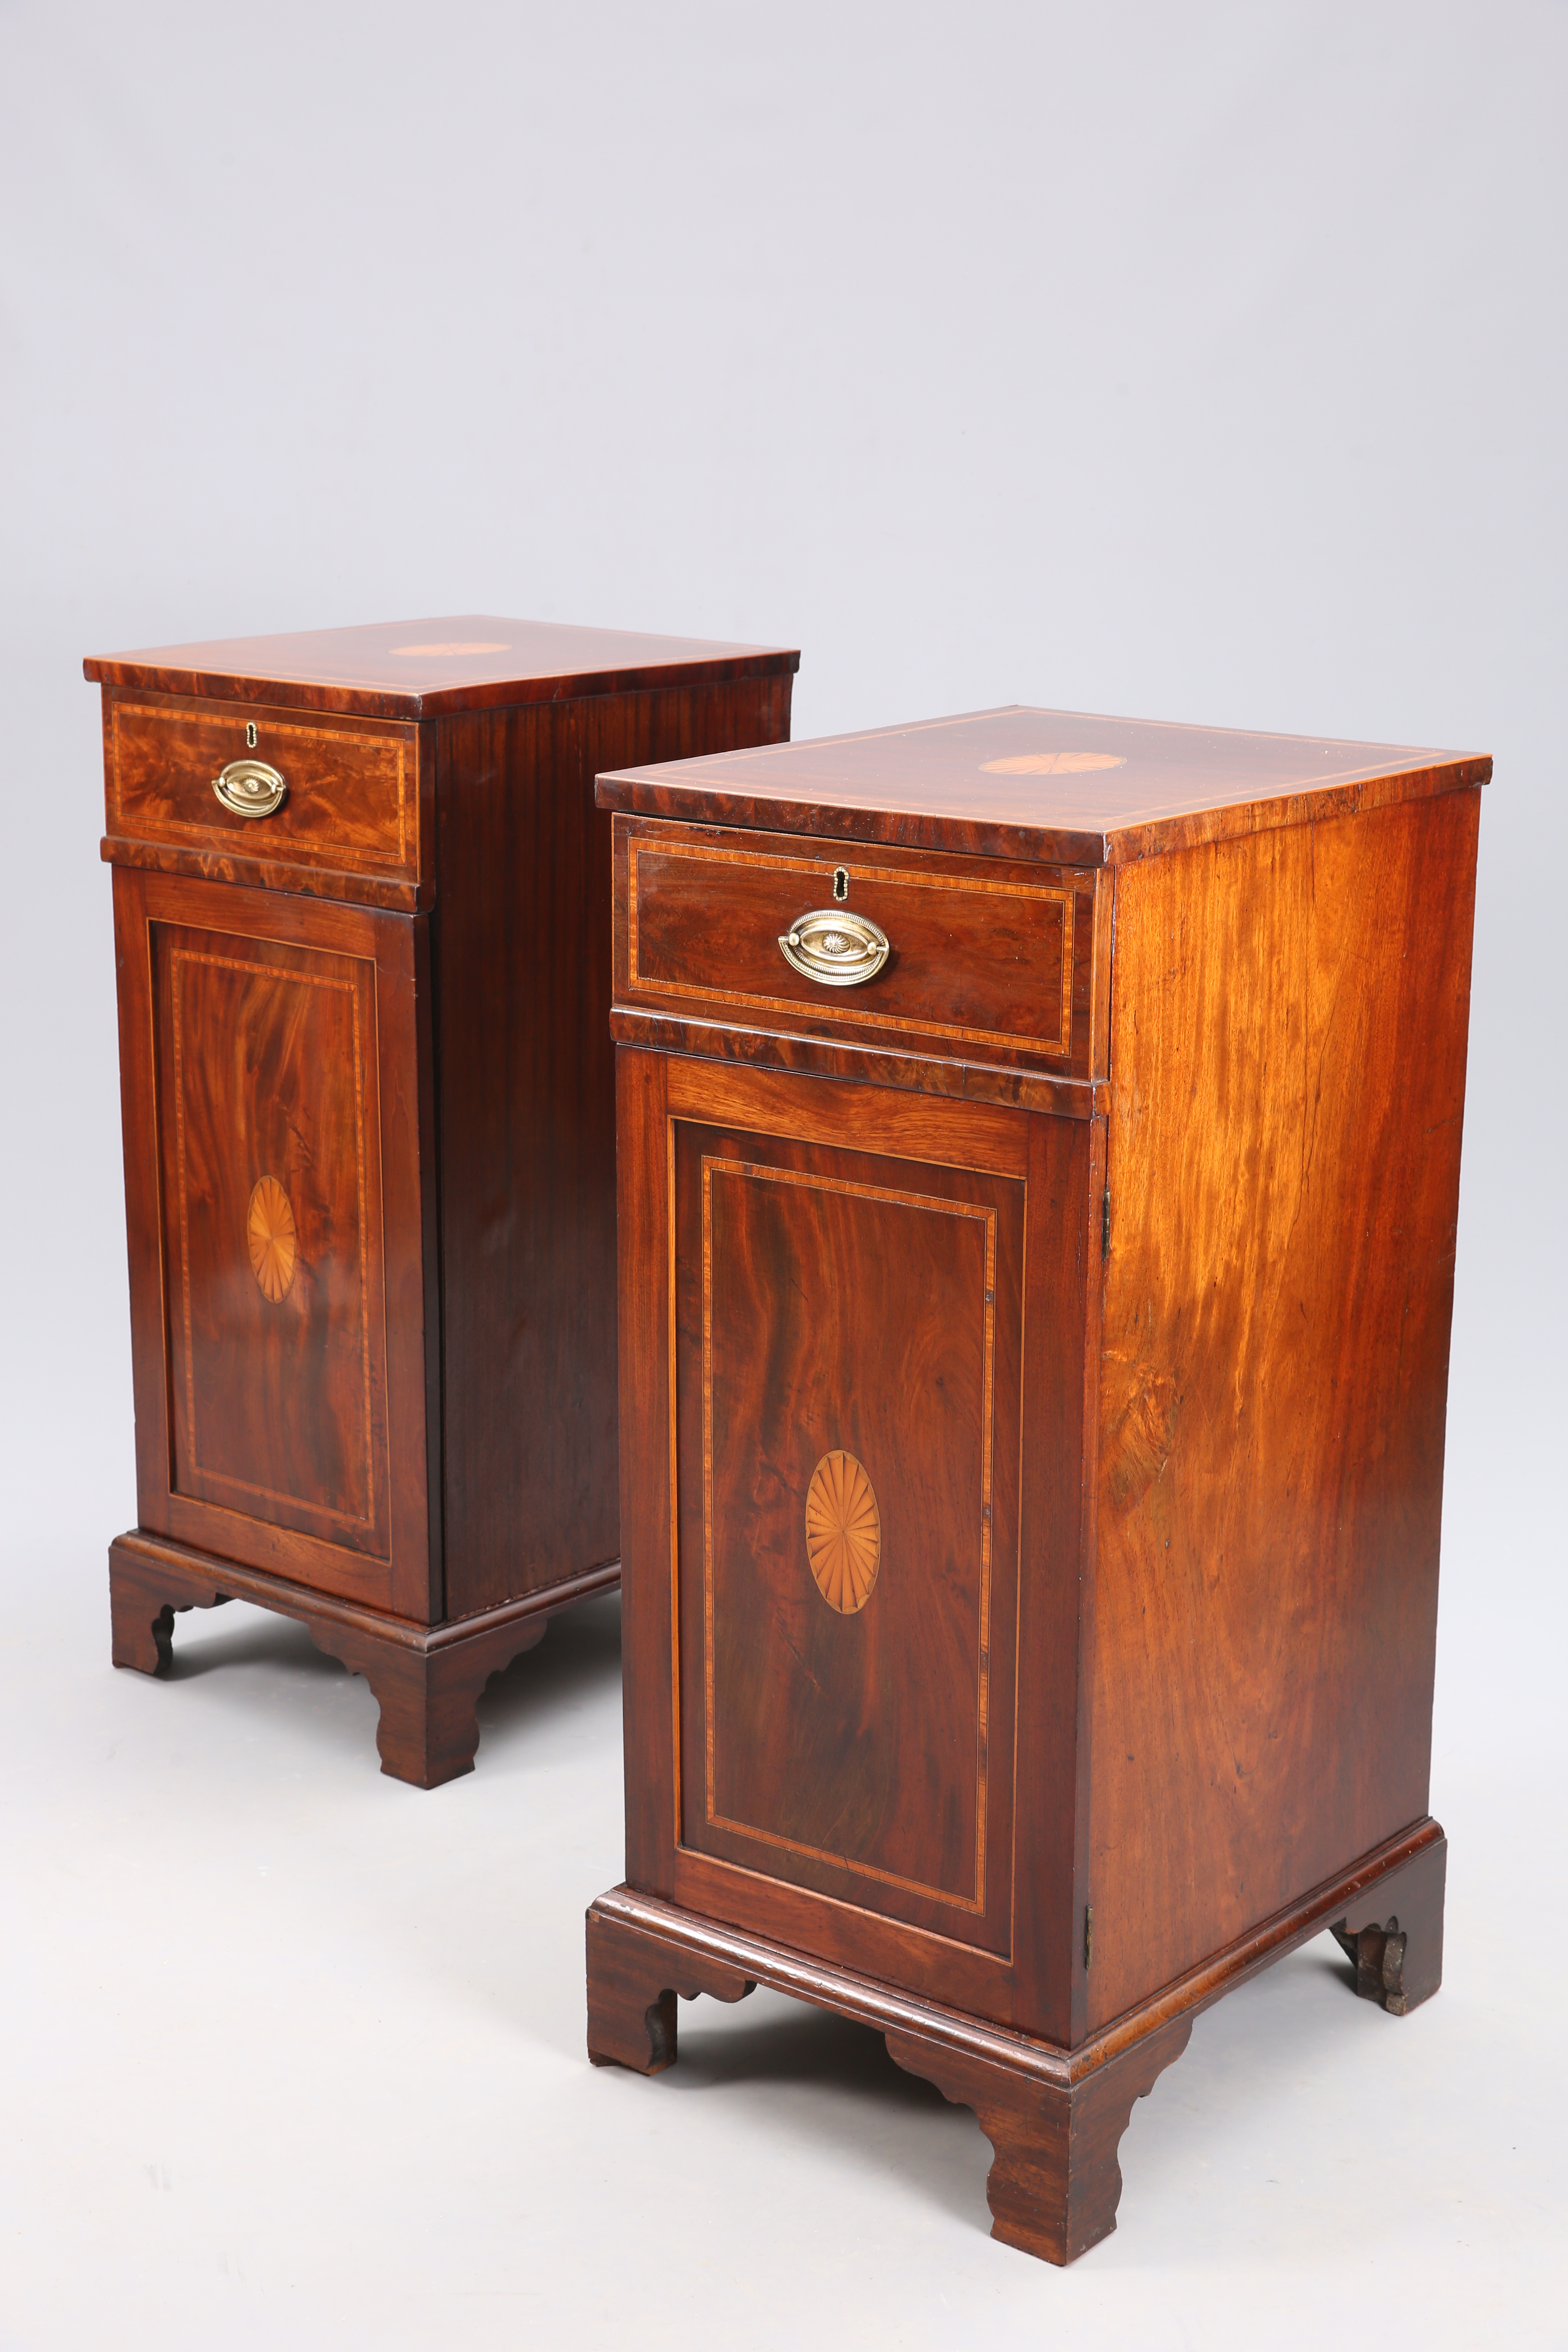 A PAIR OF GEORGE III STYLE INLAID MAHOGANY PEDESTAL CUPBOARDS